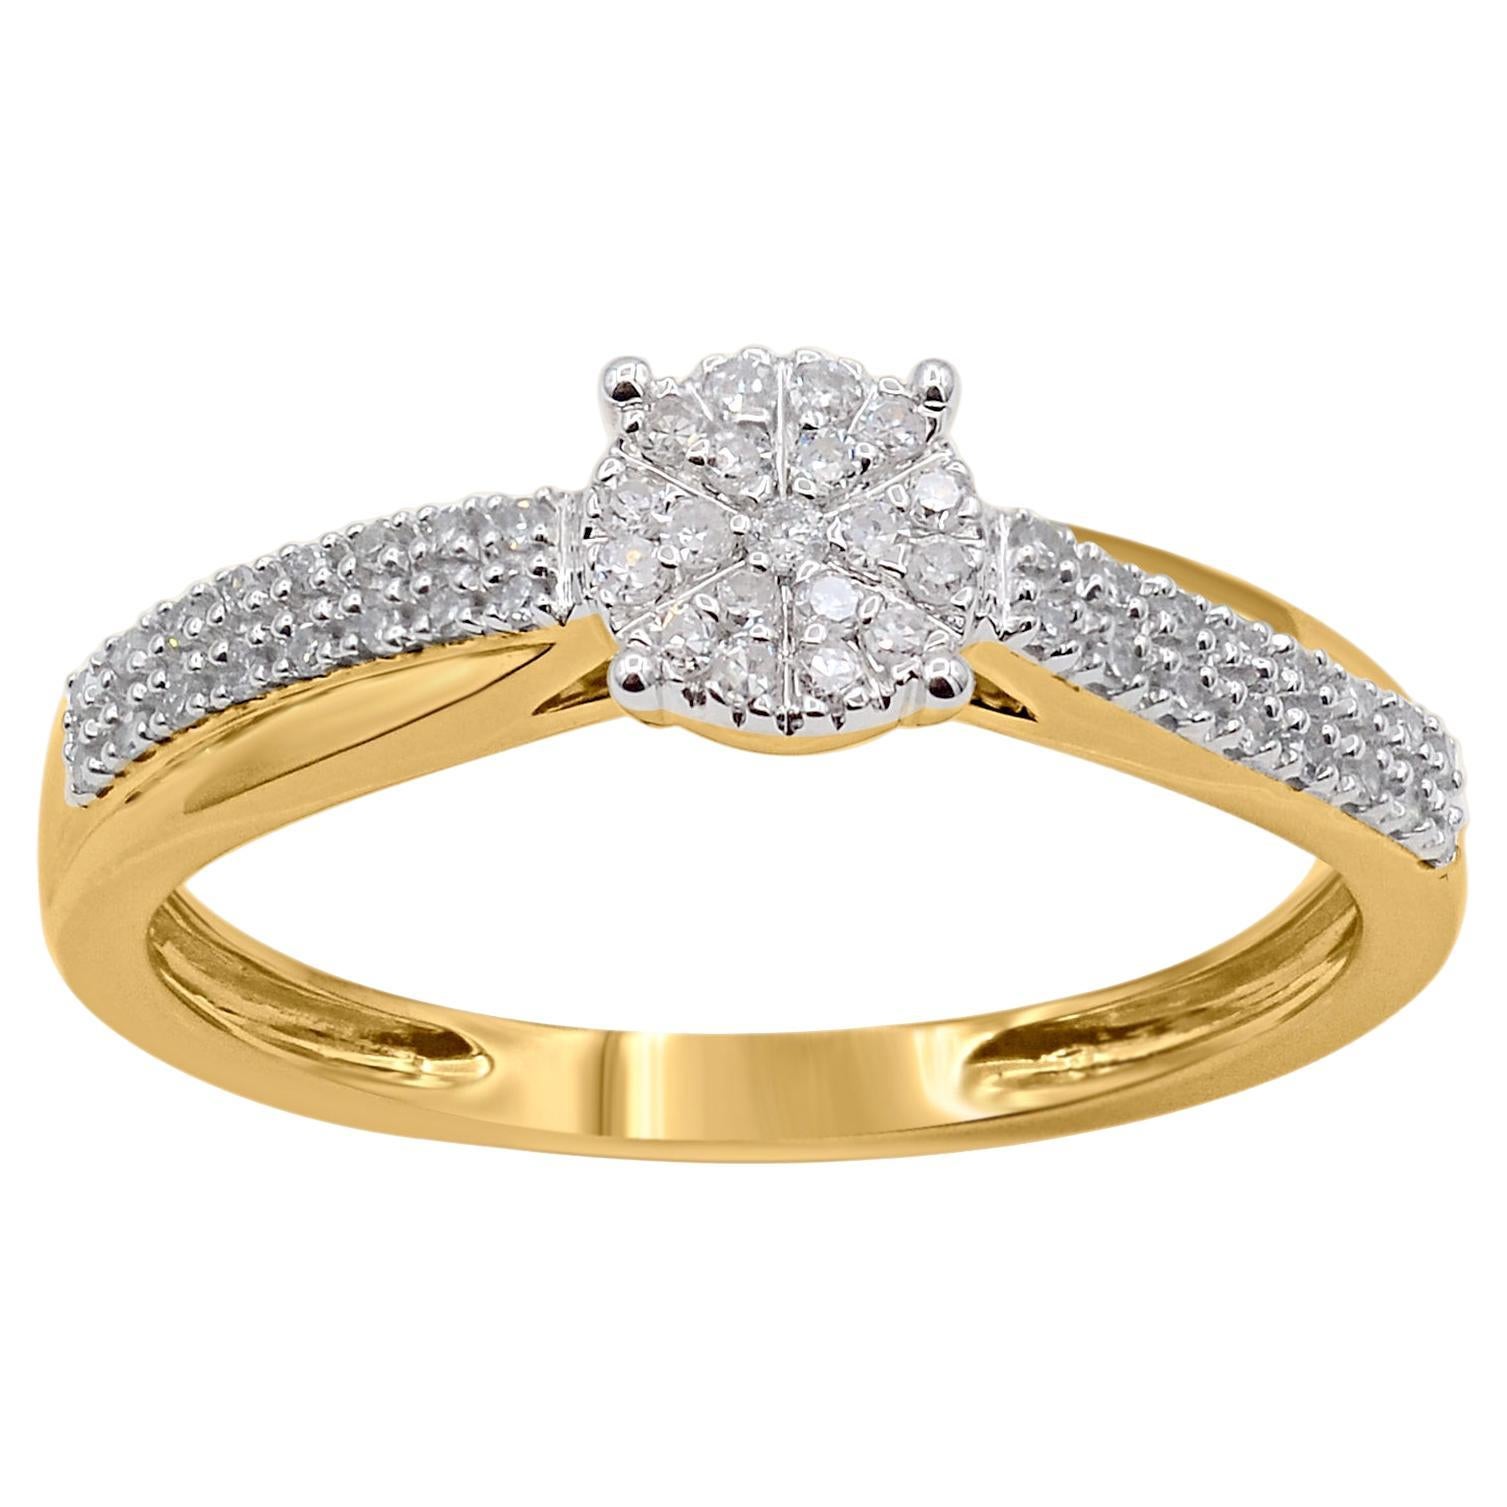 TJD 0.15 Carat Natural Round Diamond Engagement Ring in 18KT Yellow Gold For Sale